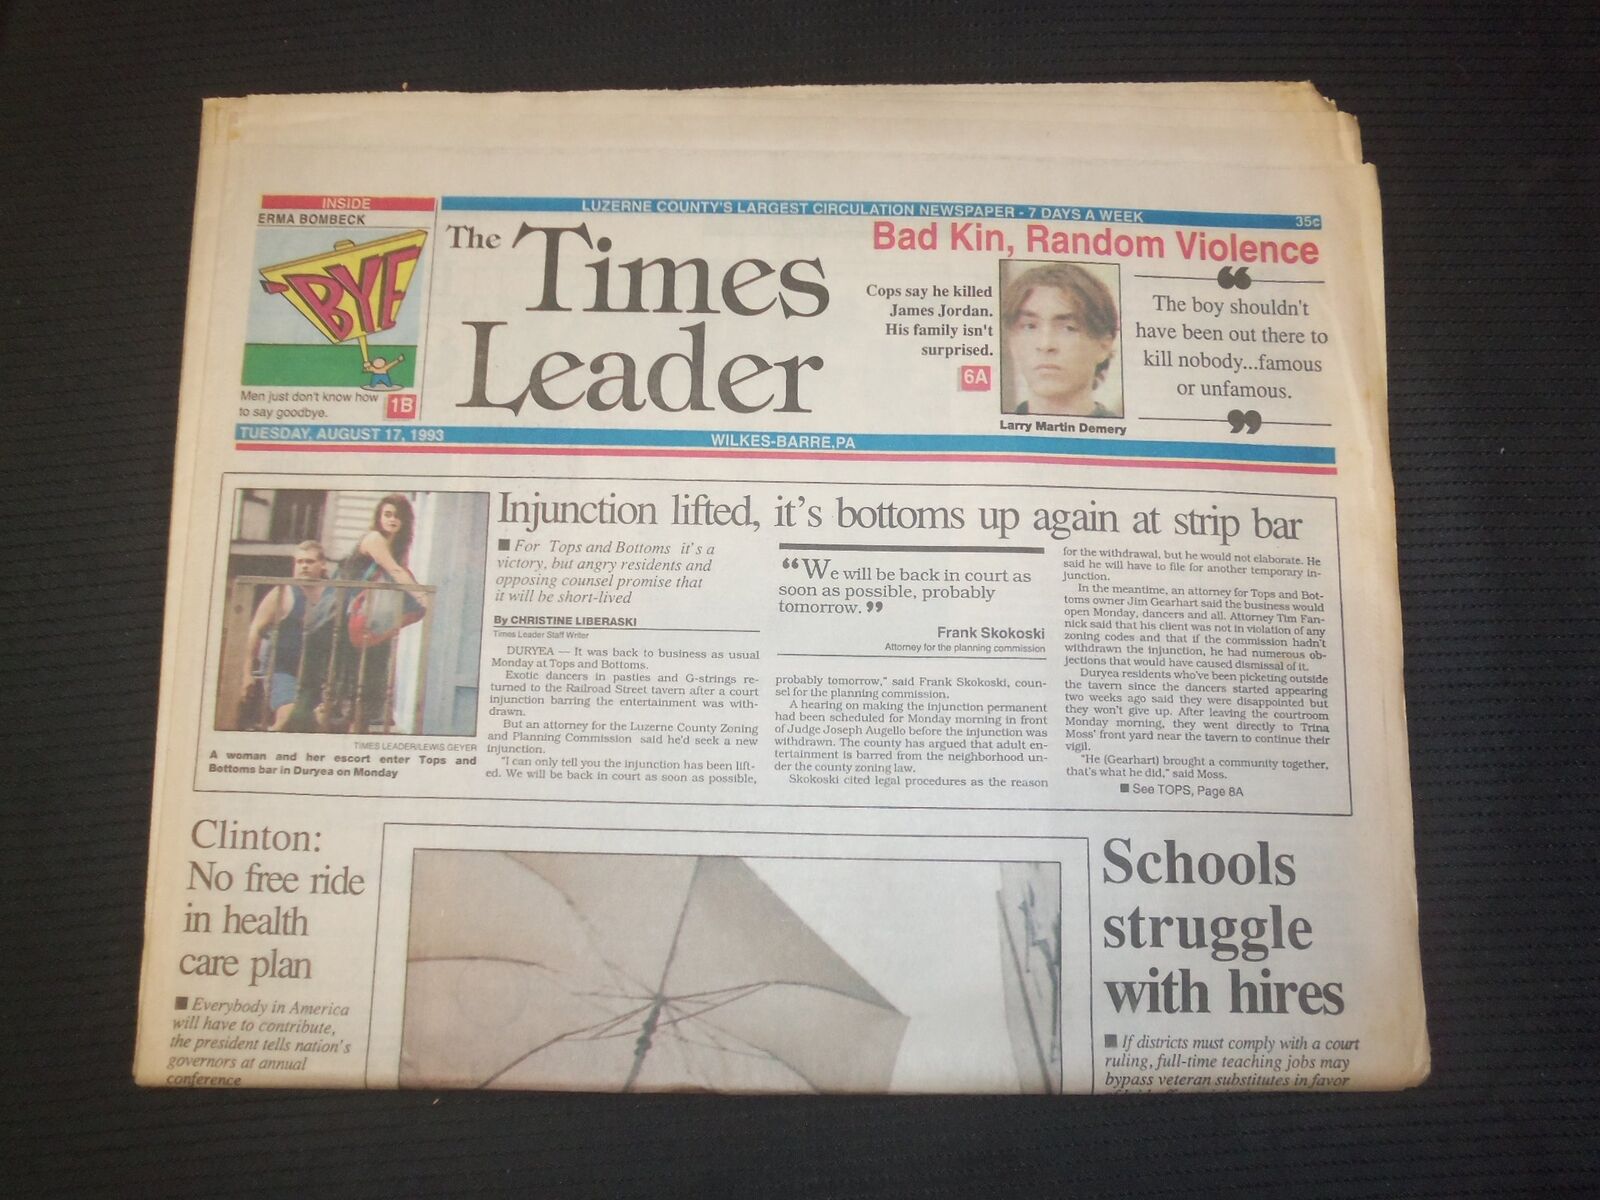 1993 AUG 17 WILKES-BARRE TIMES LEADER -CLINTON NO FREE RIDE HEALTH PLAN- NP 7544